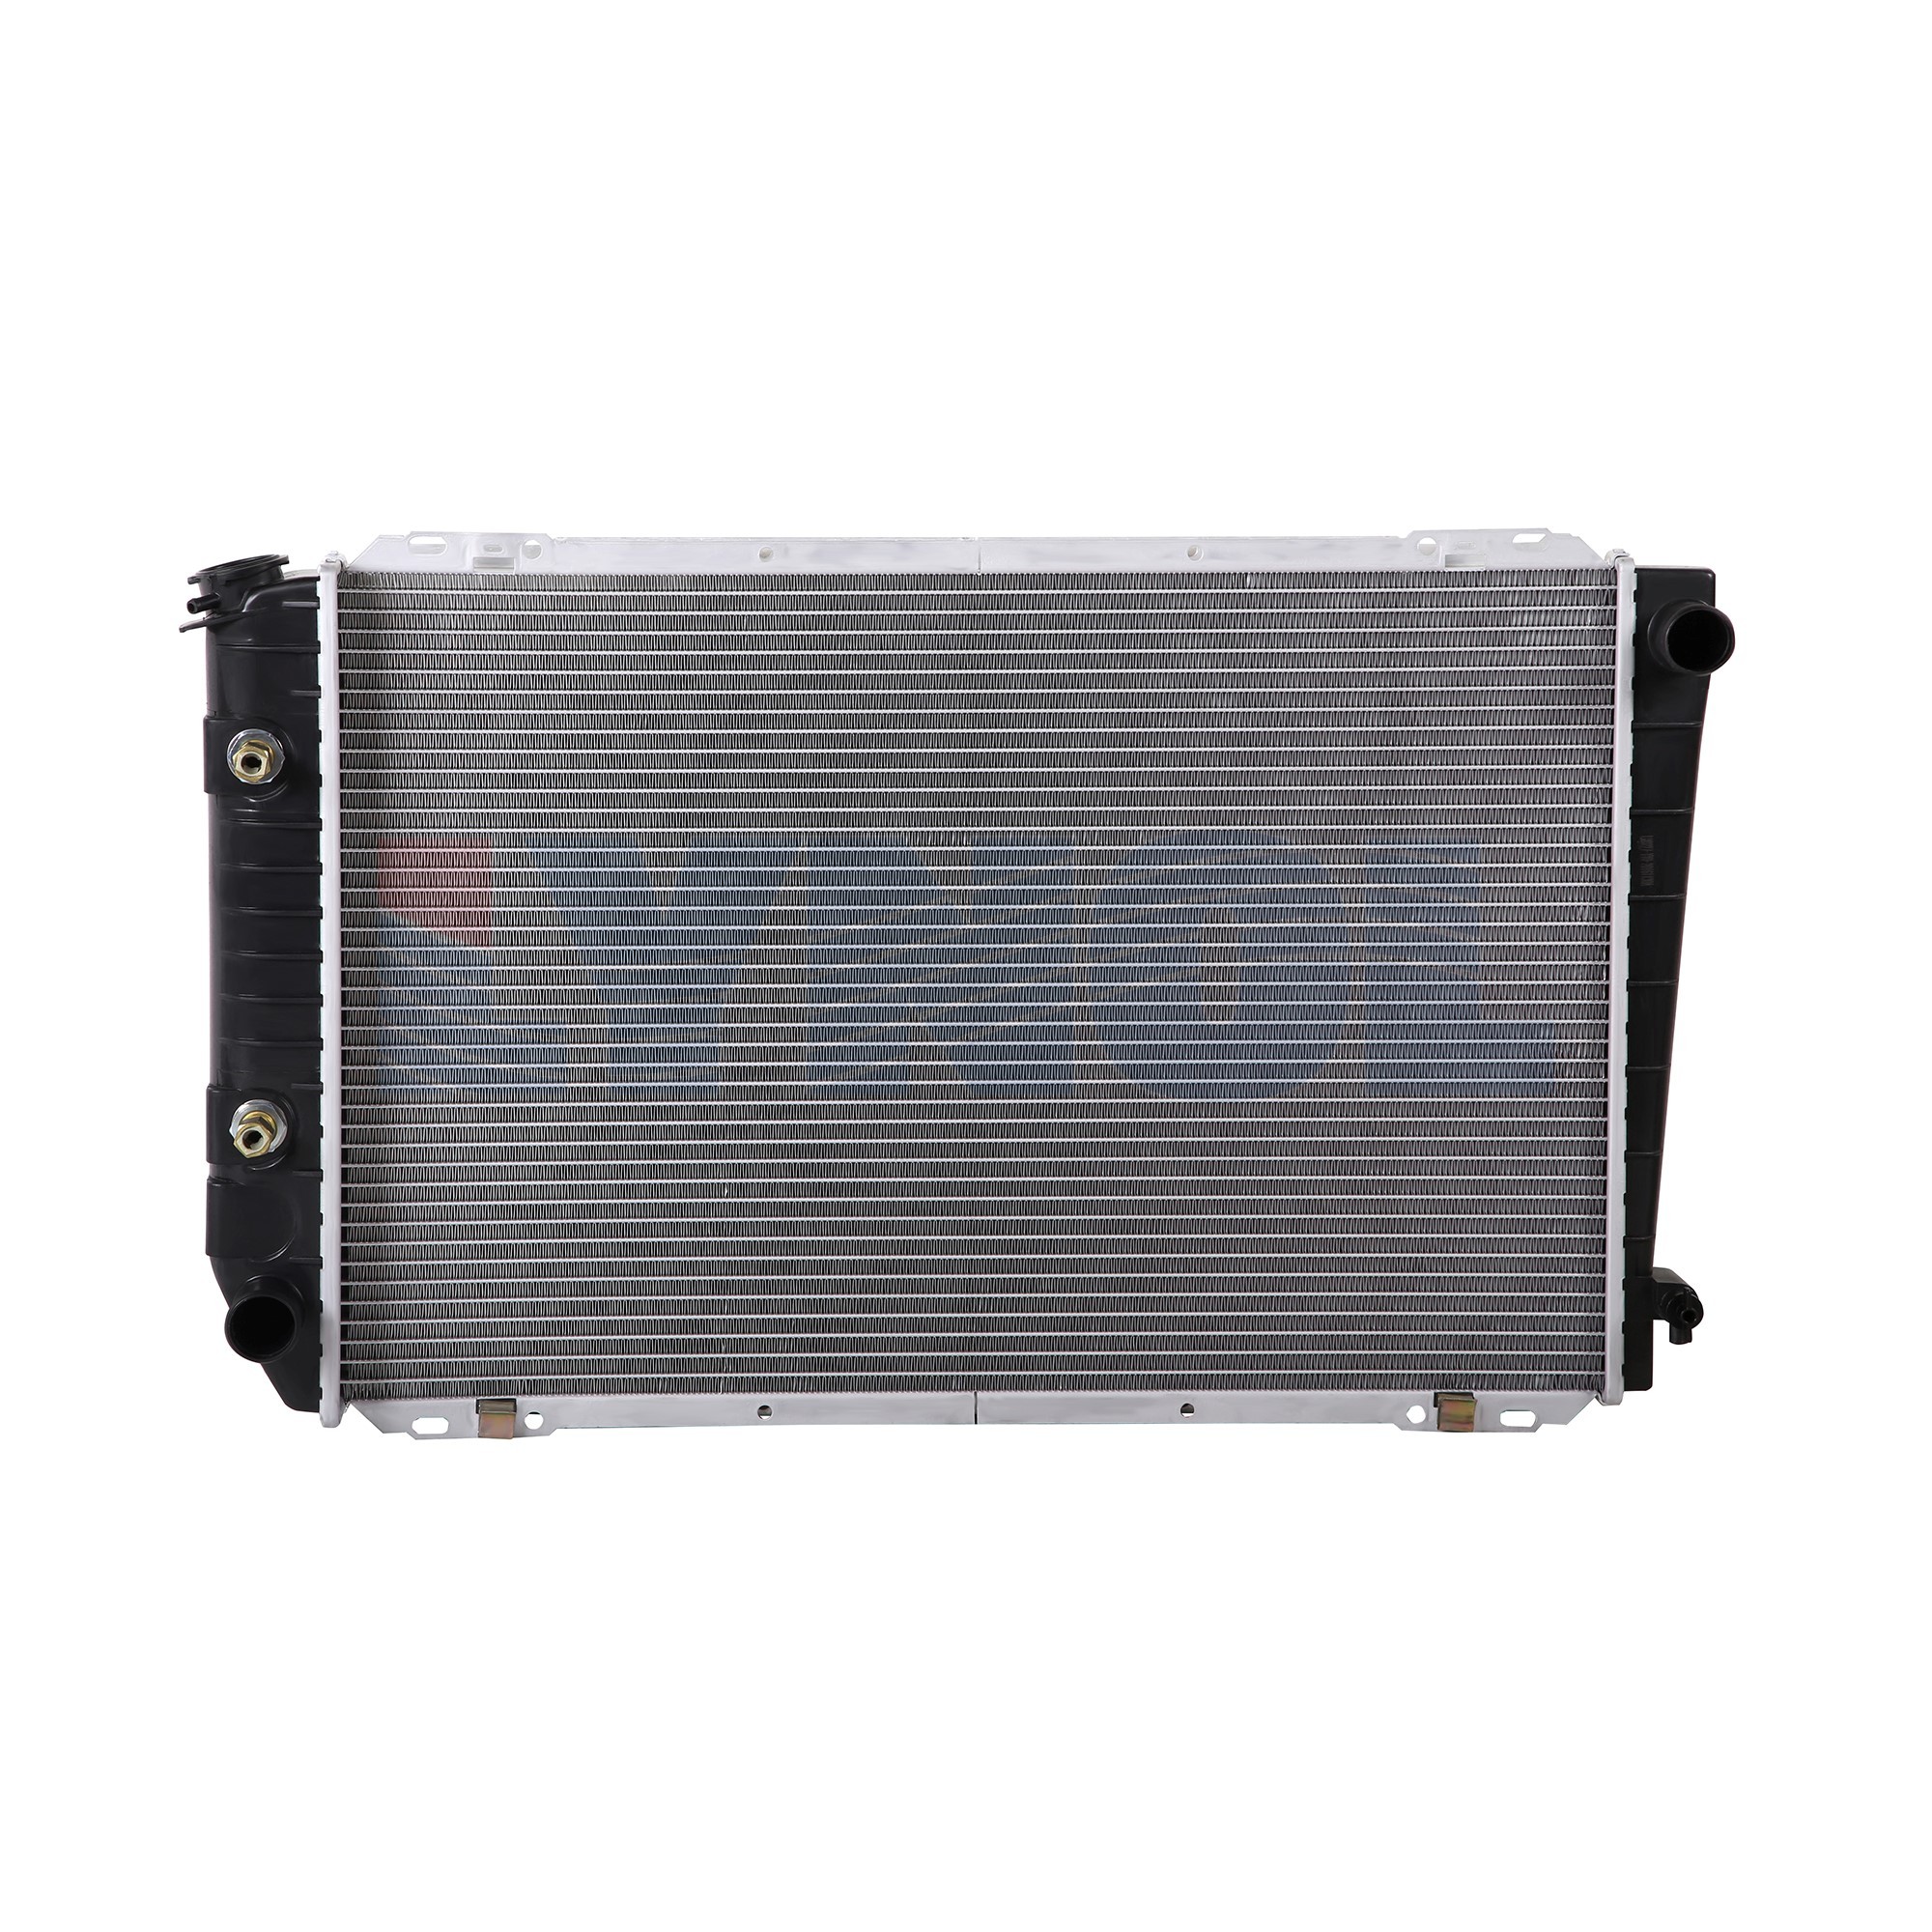 LR0227 - RADIATOR  - 86-91 Ford Country Squire / LTD Crown Victoria, Lincoln Town Car, Mercury Colony Park / Grand Marquis